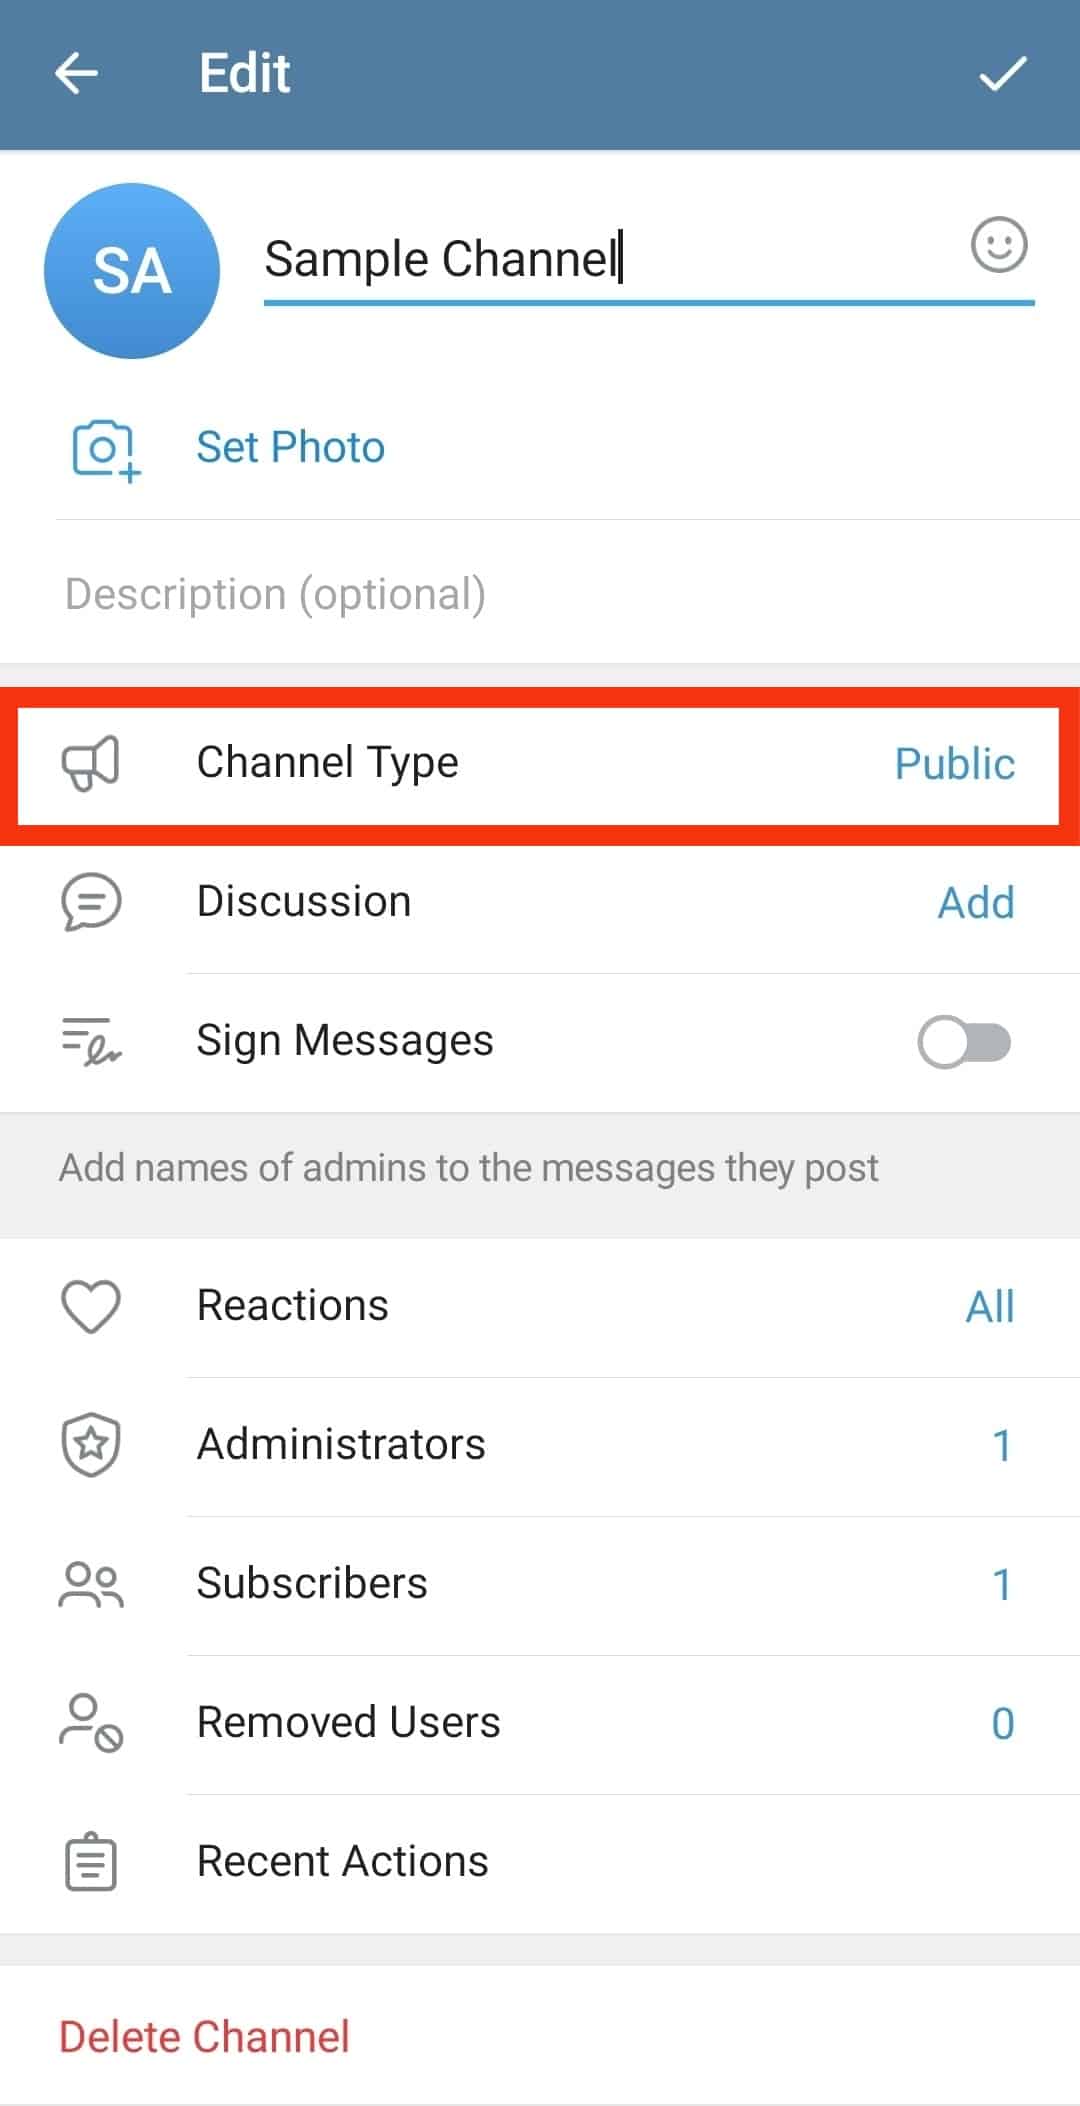 Locate And Click The Channel Type